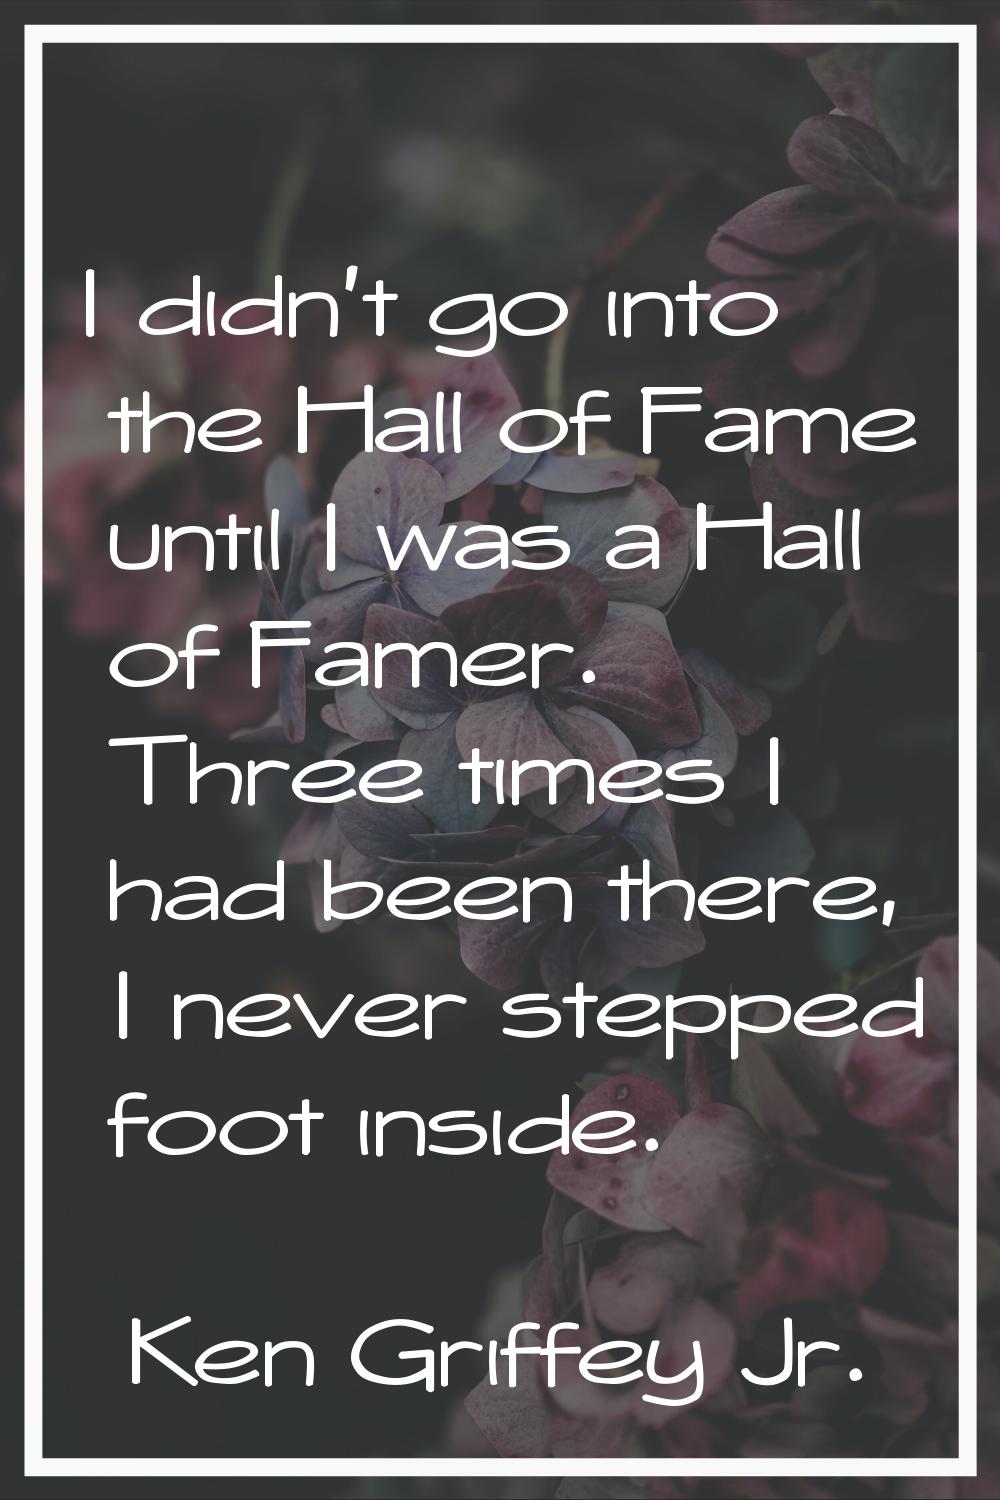 I didn't go into the Hall of Fame until I was a Hall of Famer. Three times I had been there, I neve